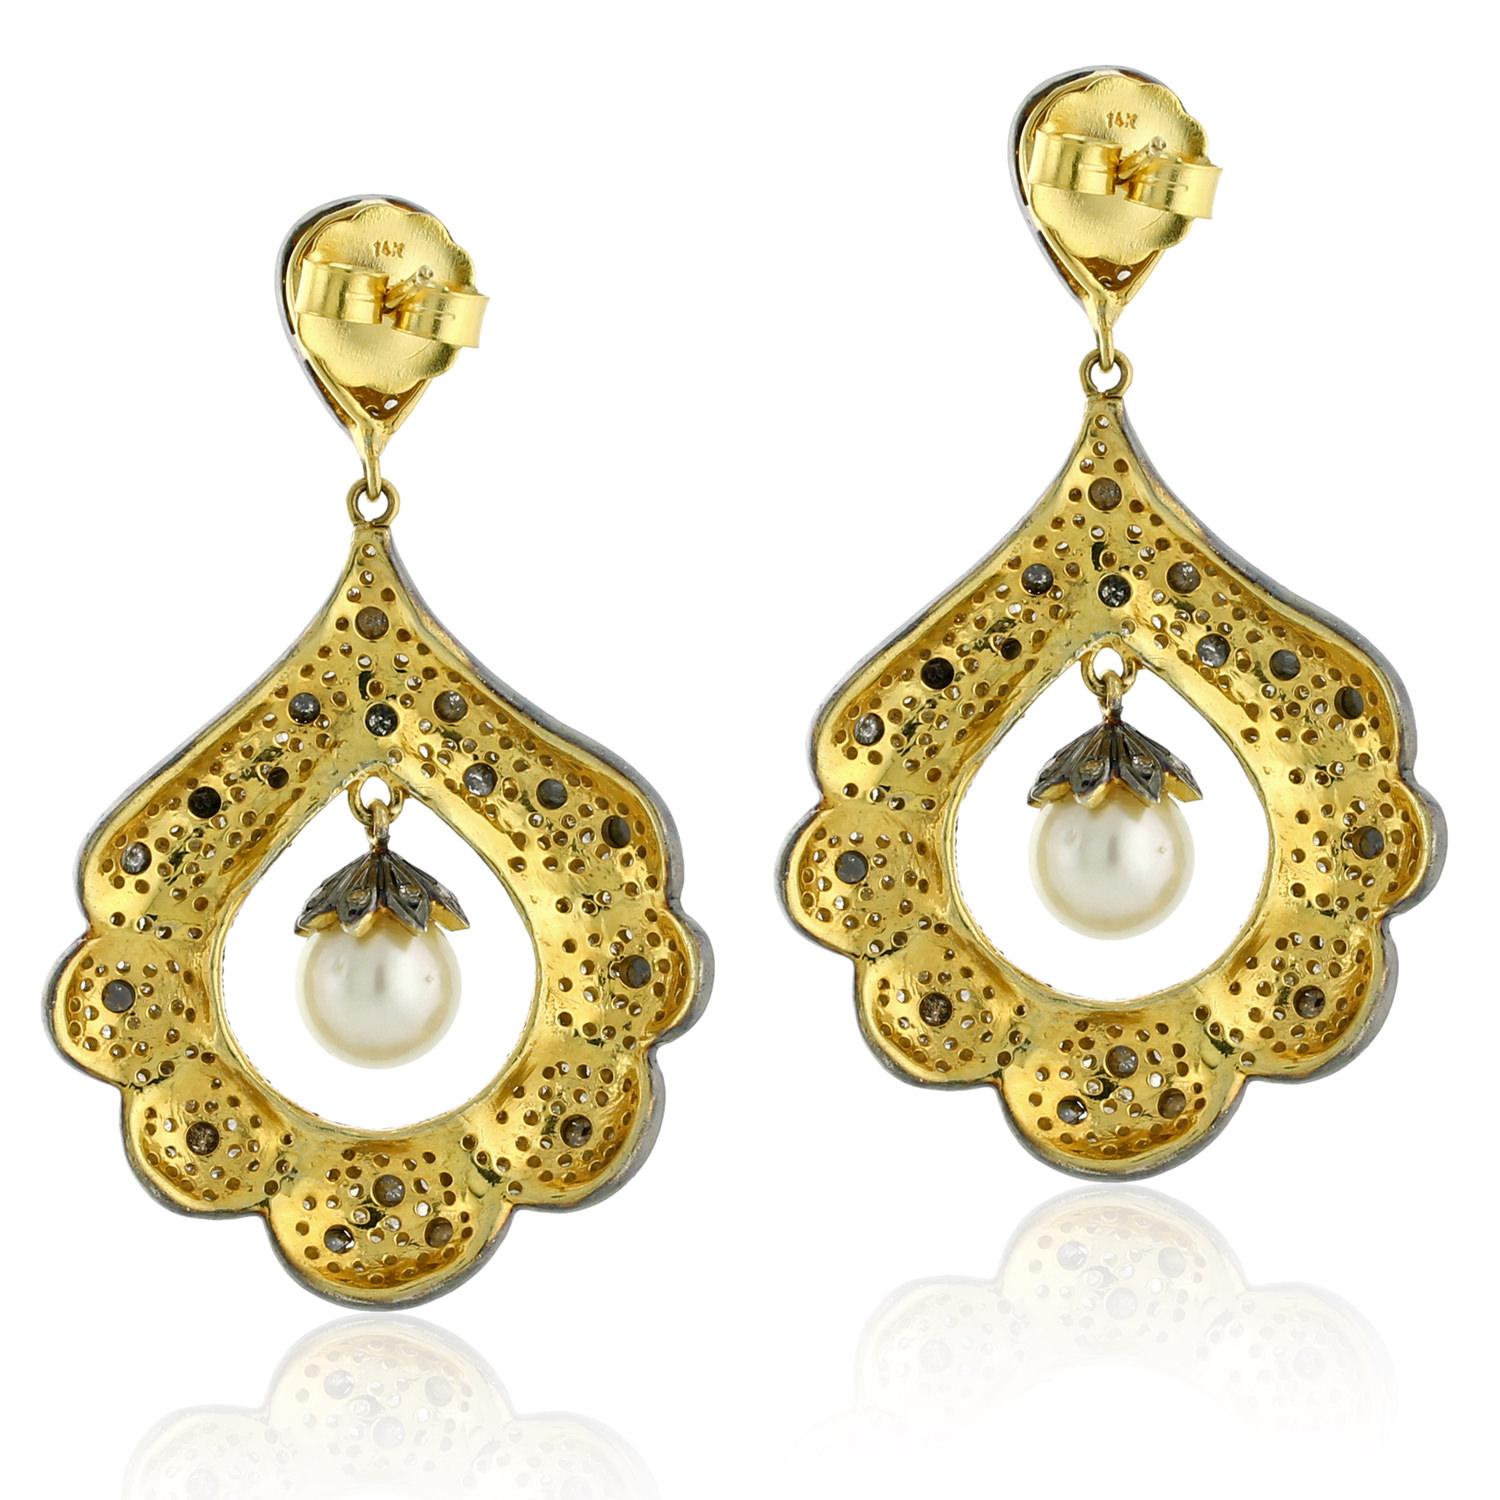 These earrings feature a stunning pearl center stone surrounded by sparkling pave diamonds. Whether dressing up a casual look or adding the finishing touch to an evening ensemble, these earrings are sure to become a favorite in your jewelry